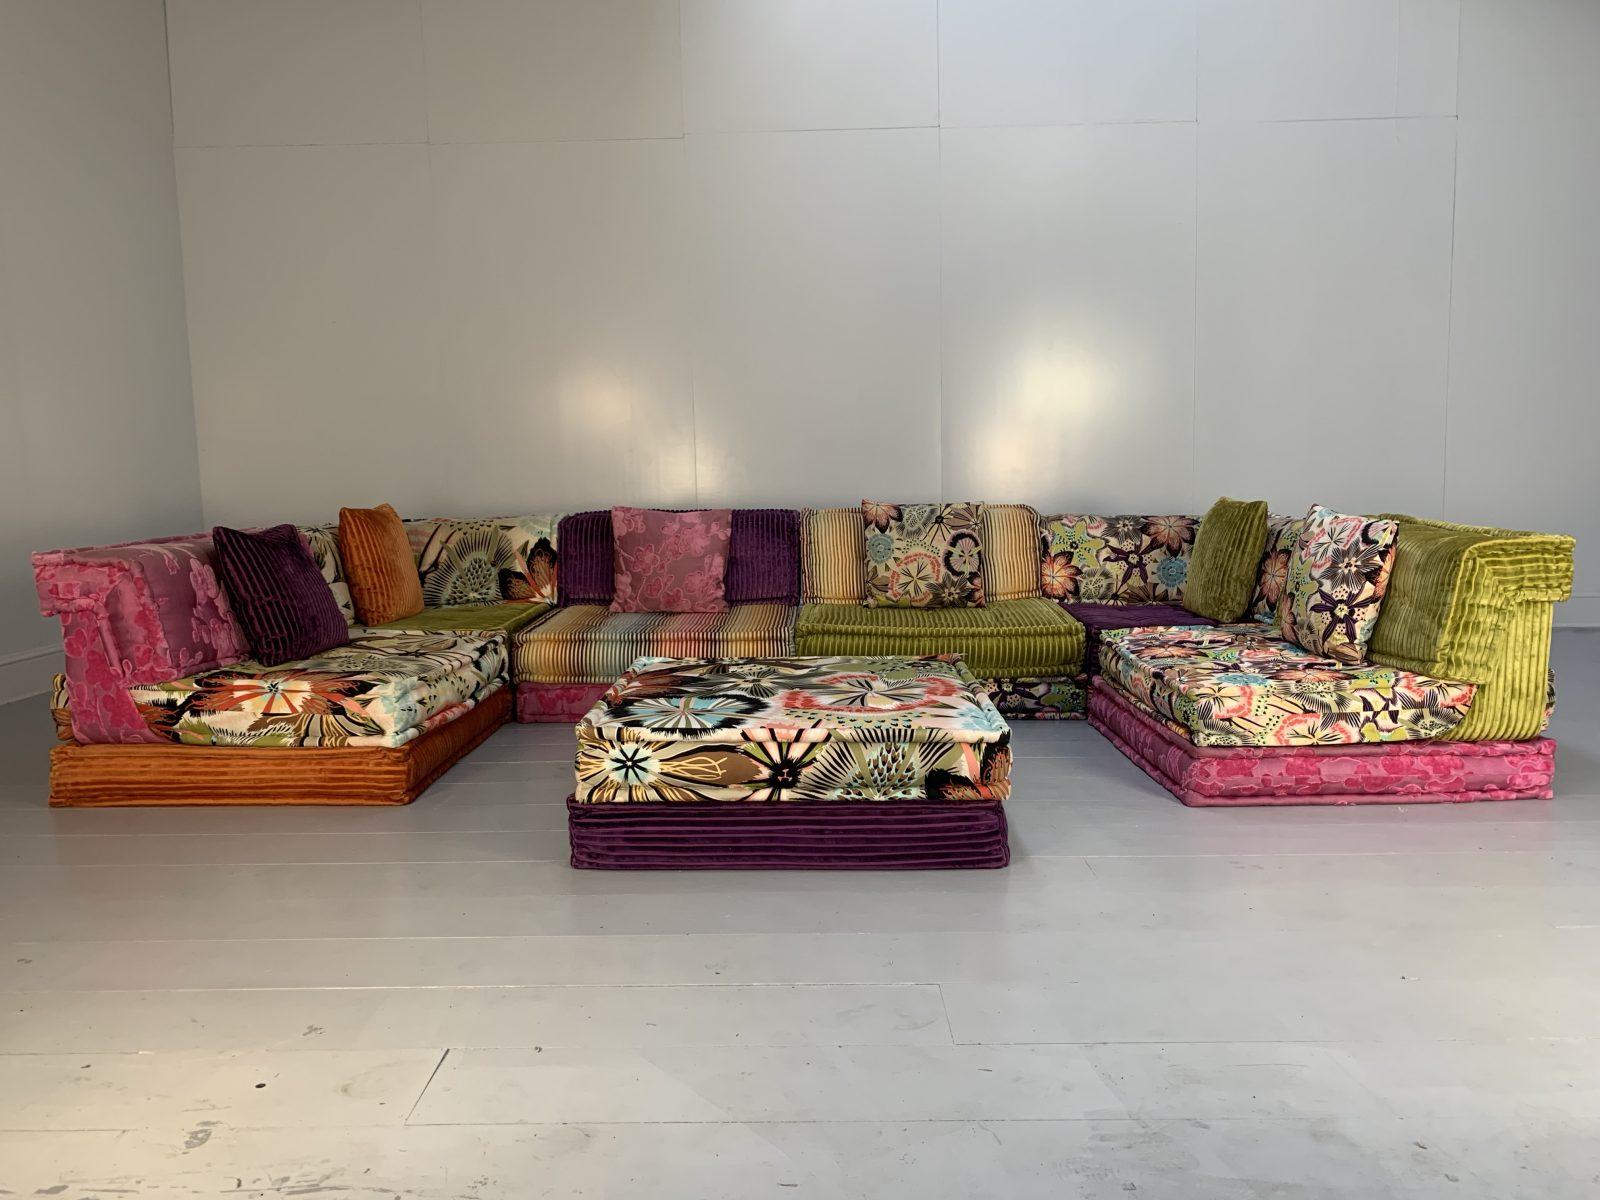 This is quite possibly one of the most-desirable and sought-after large-scale sofas available today, it being a rare opportunity to acquire a gorgeous “Mah Jong” sofa, consisting of a number of sofa-units capable of making any number of